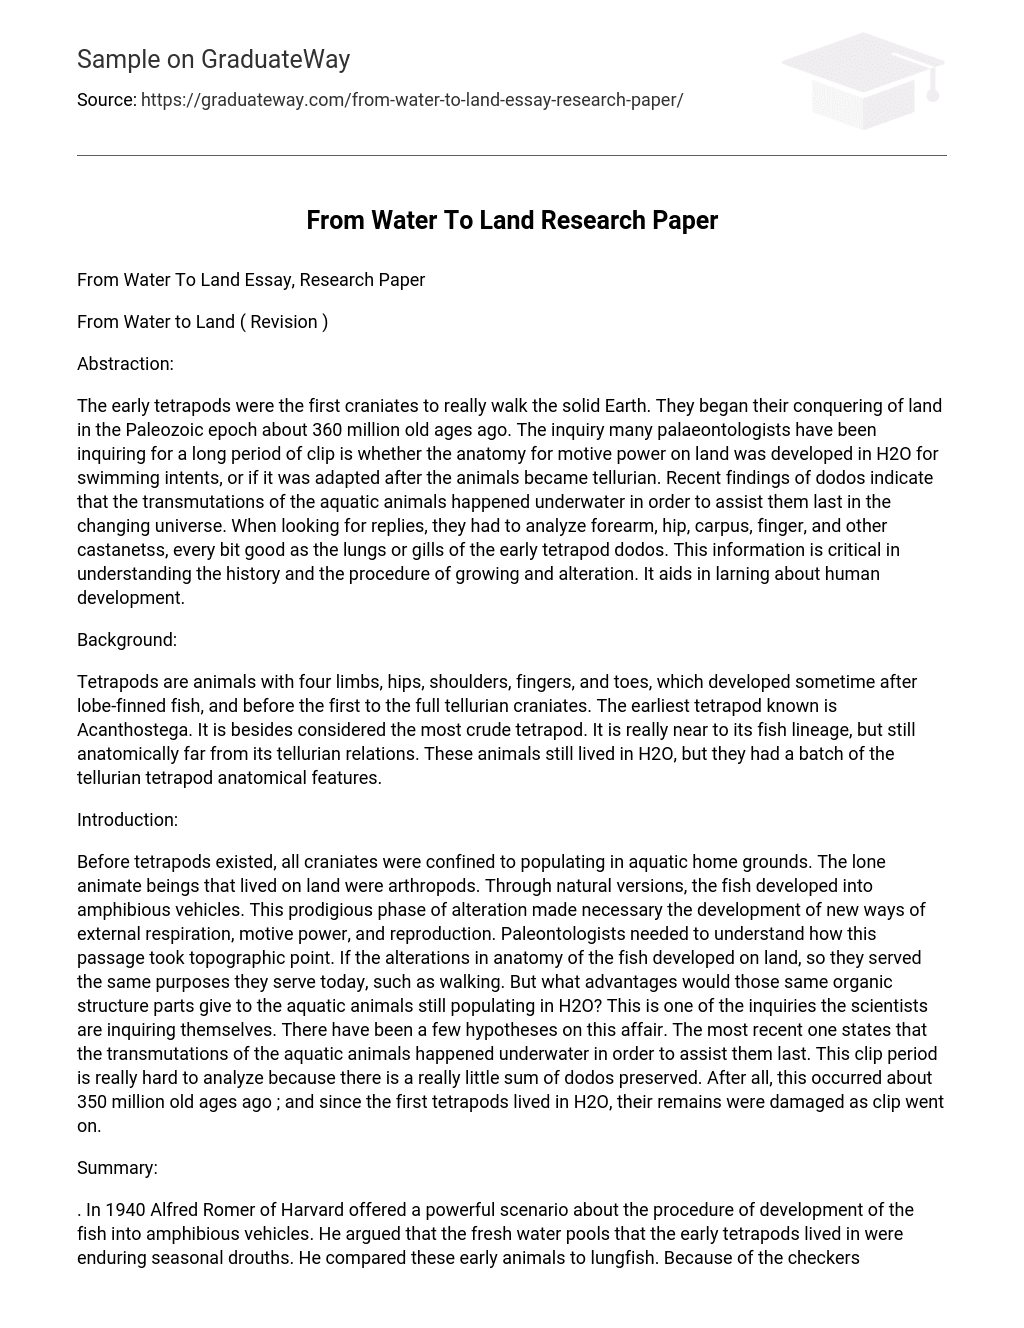 From Water To Land Research Paper